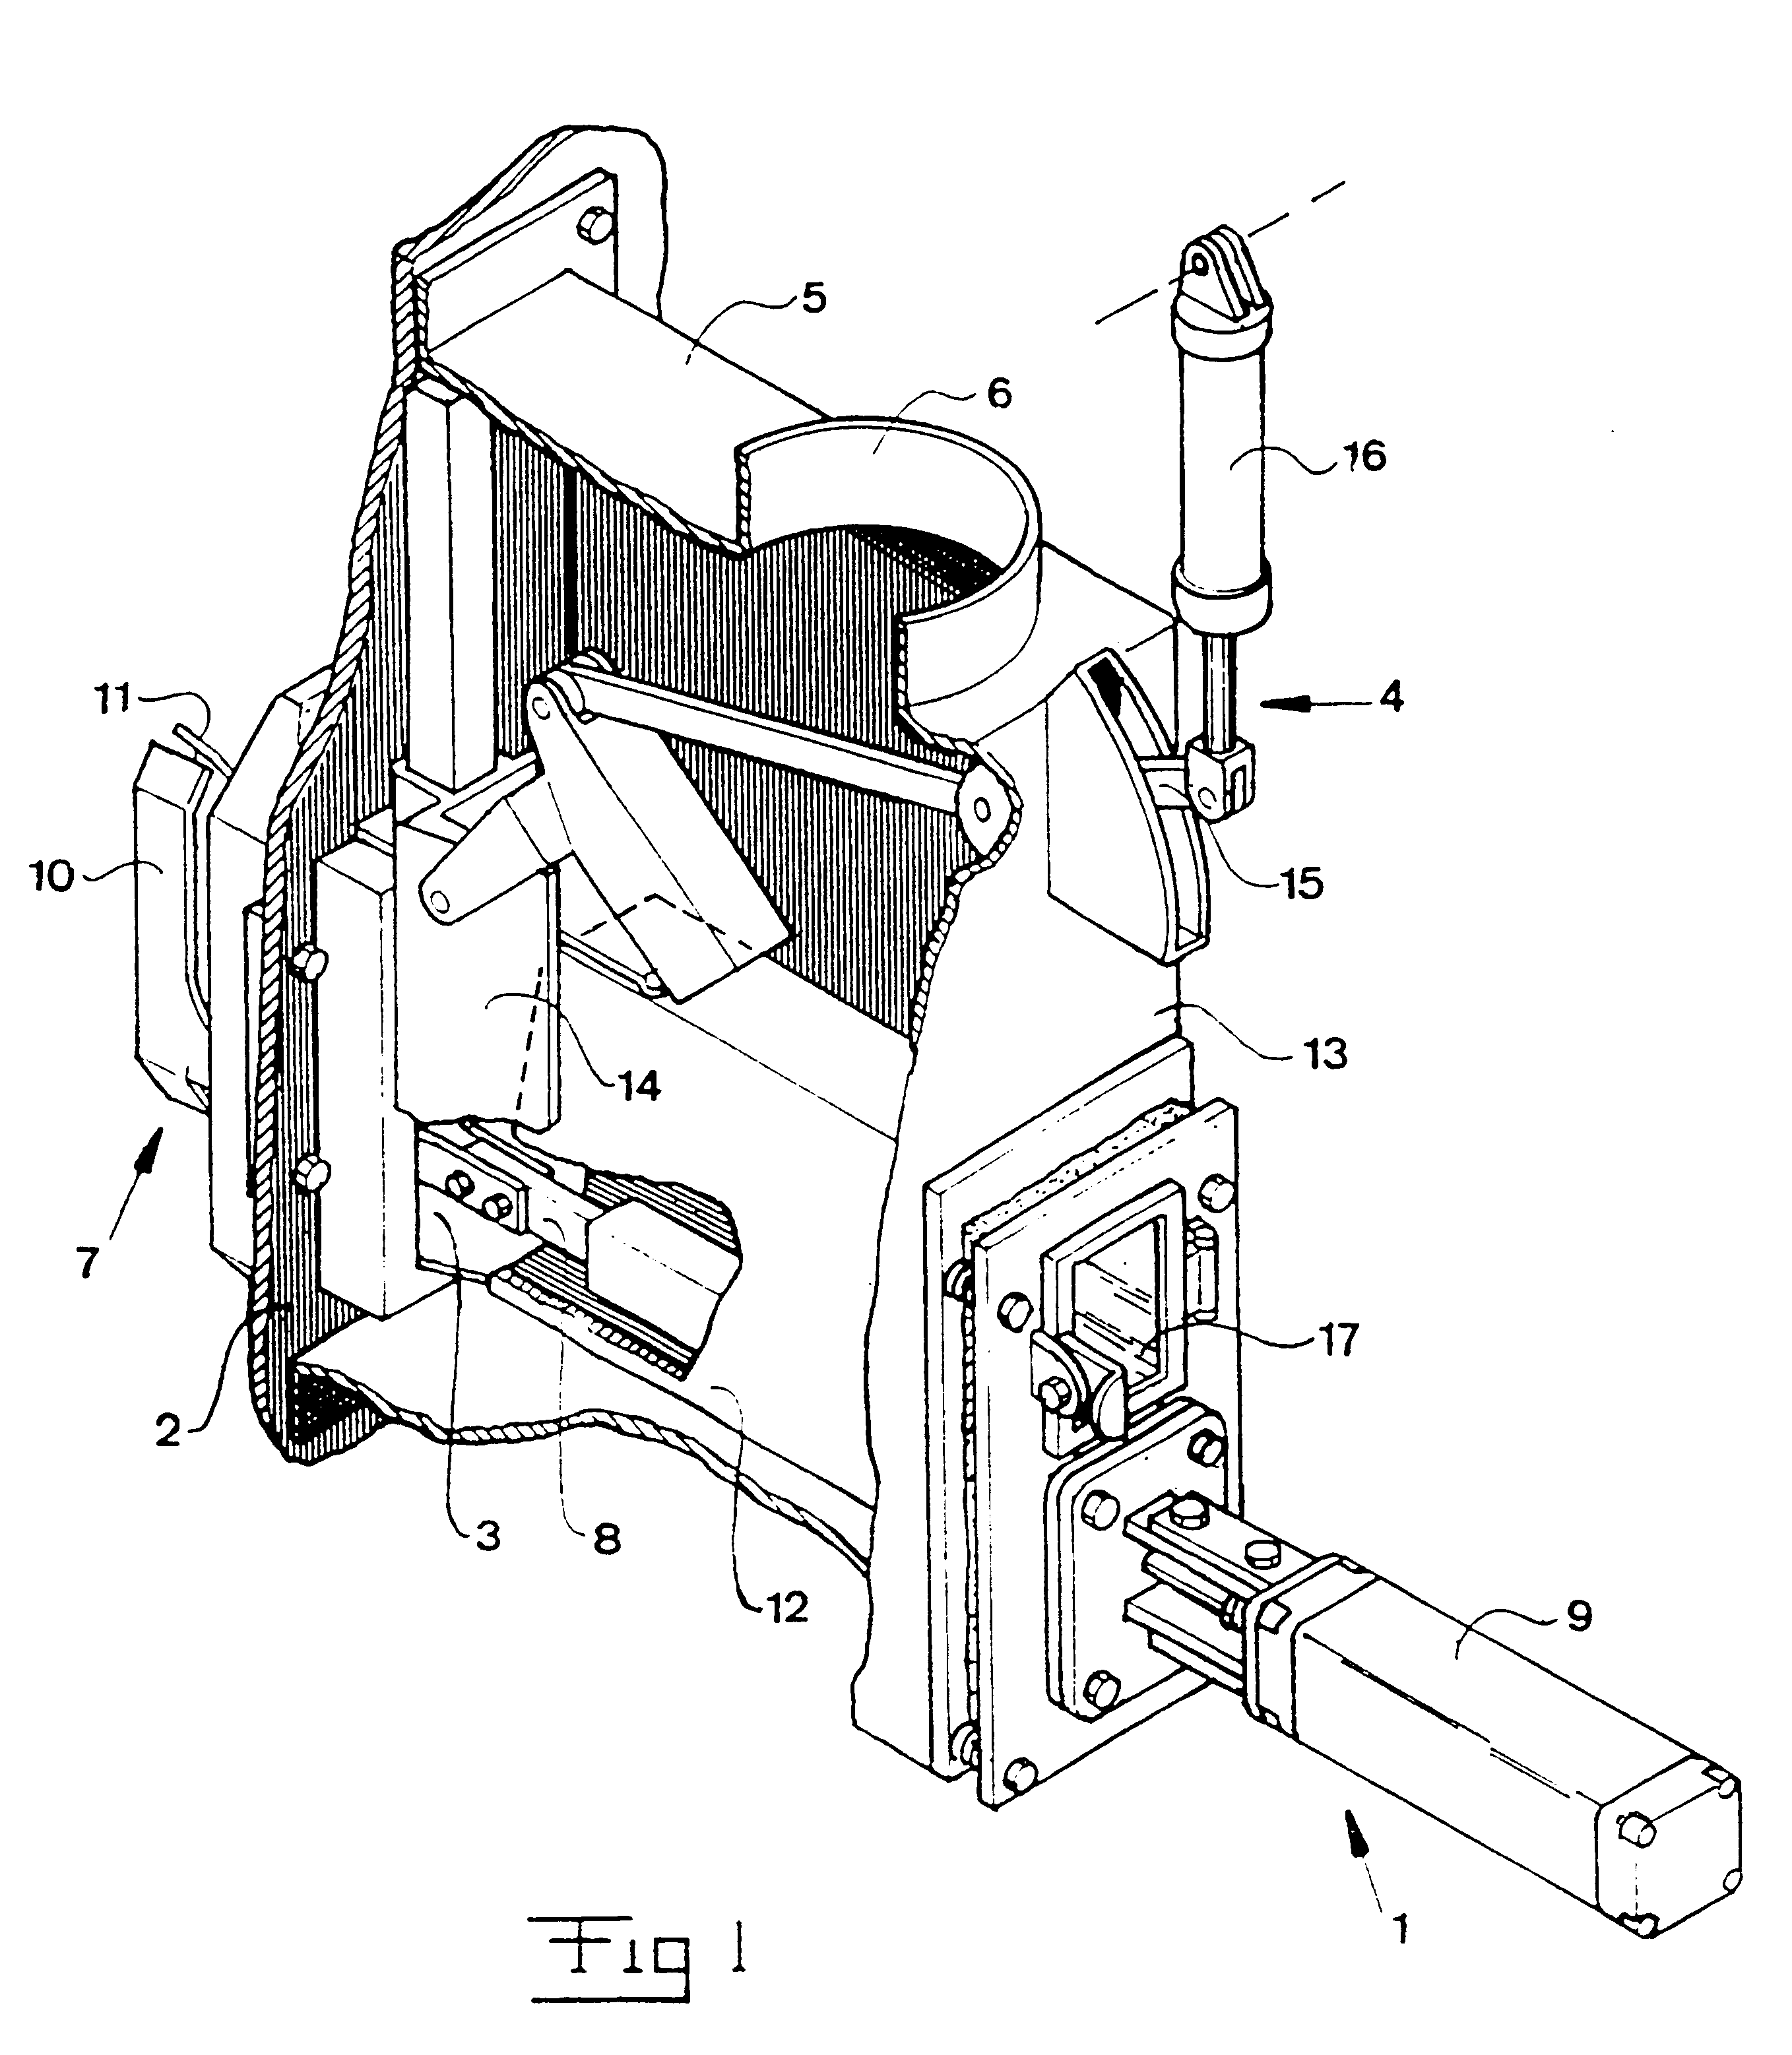 Device for regulating and cleaning an air intake